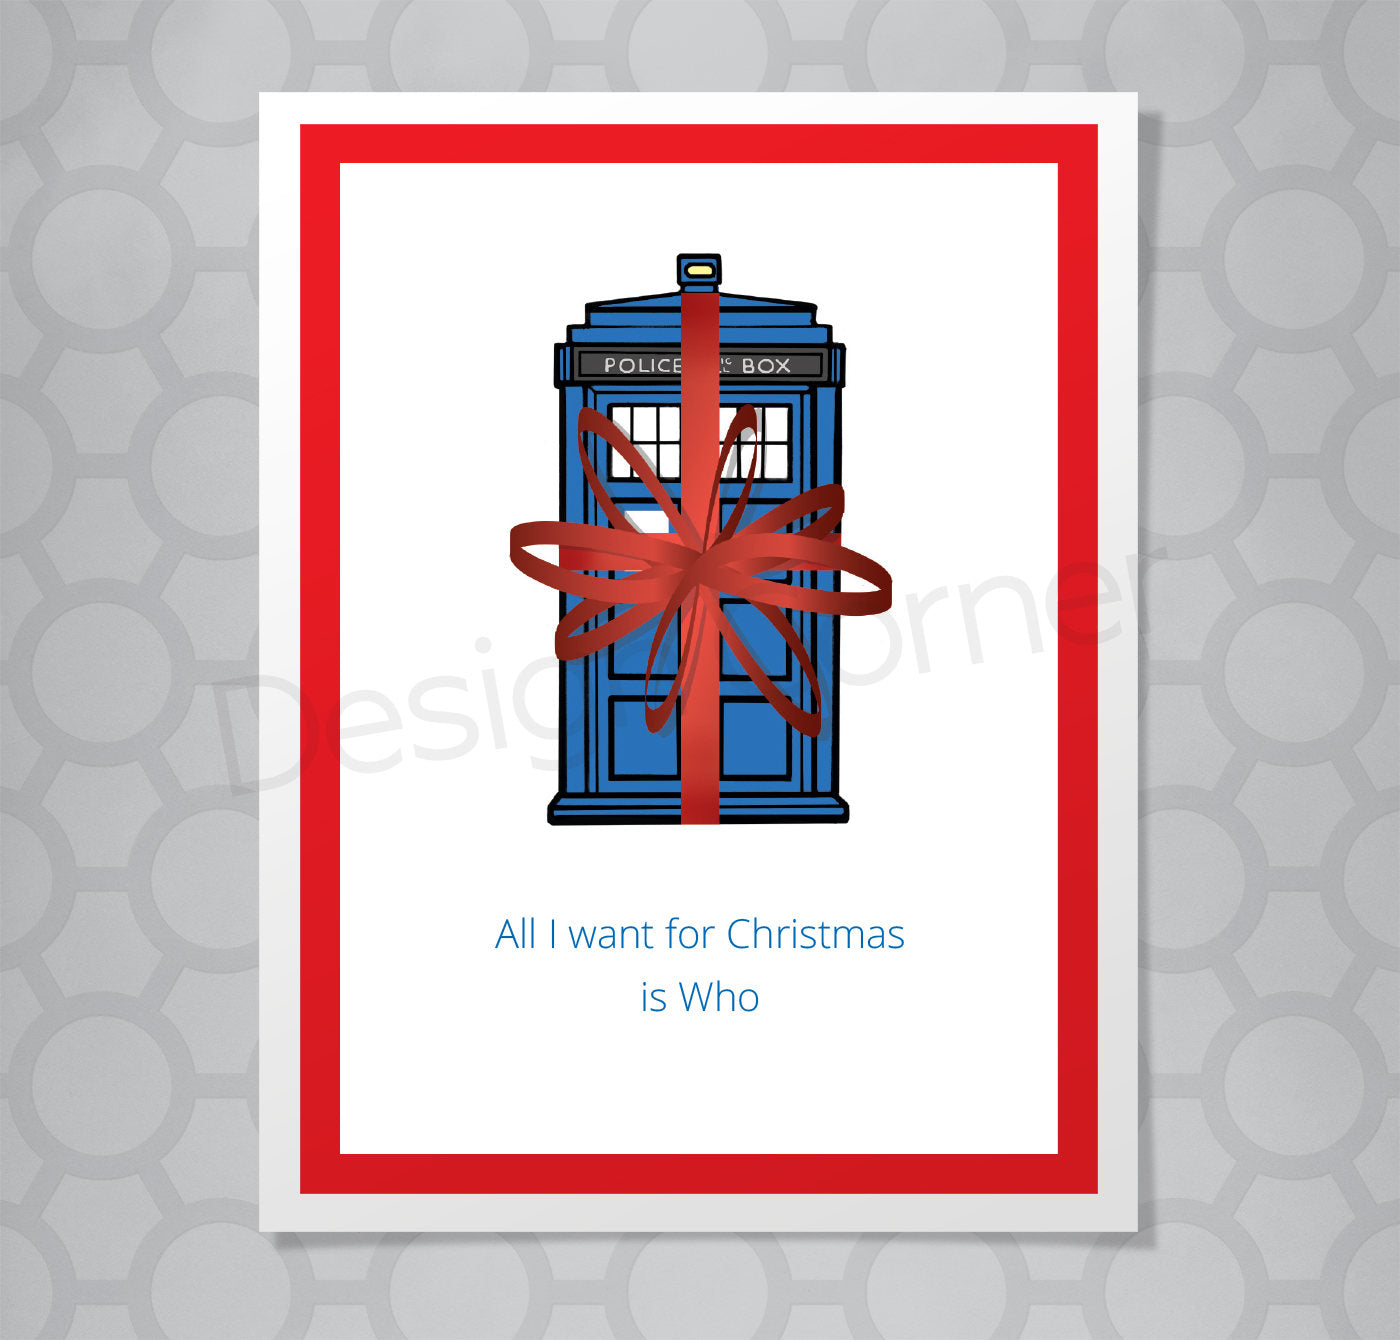 Illustration of Tardis on greeting card with red bow and caption "All I want for Christmas is Who"